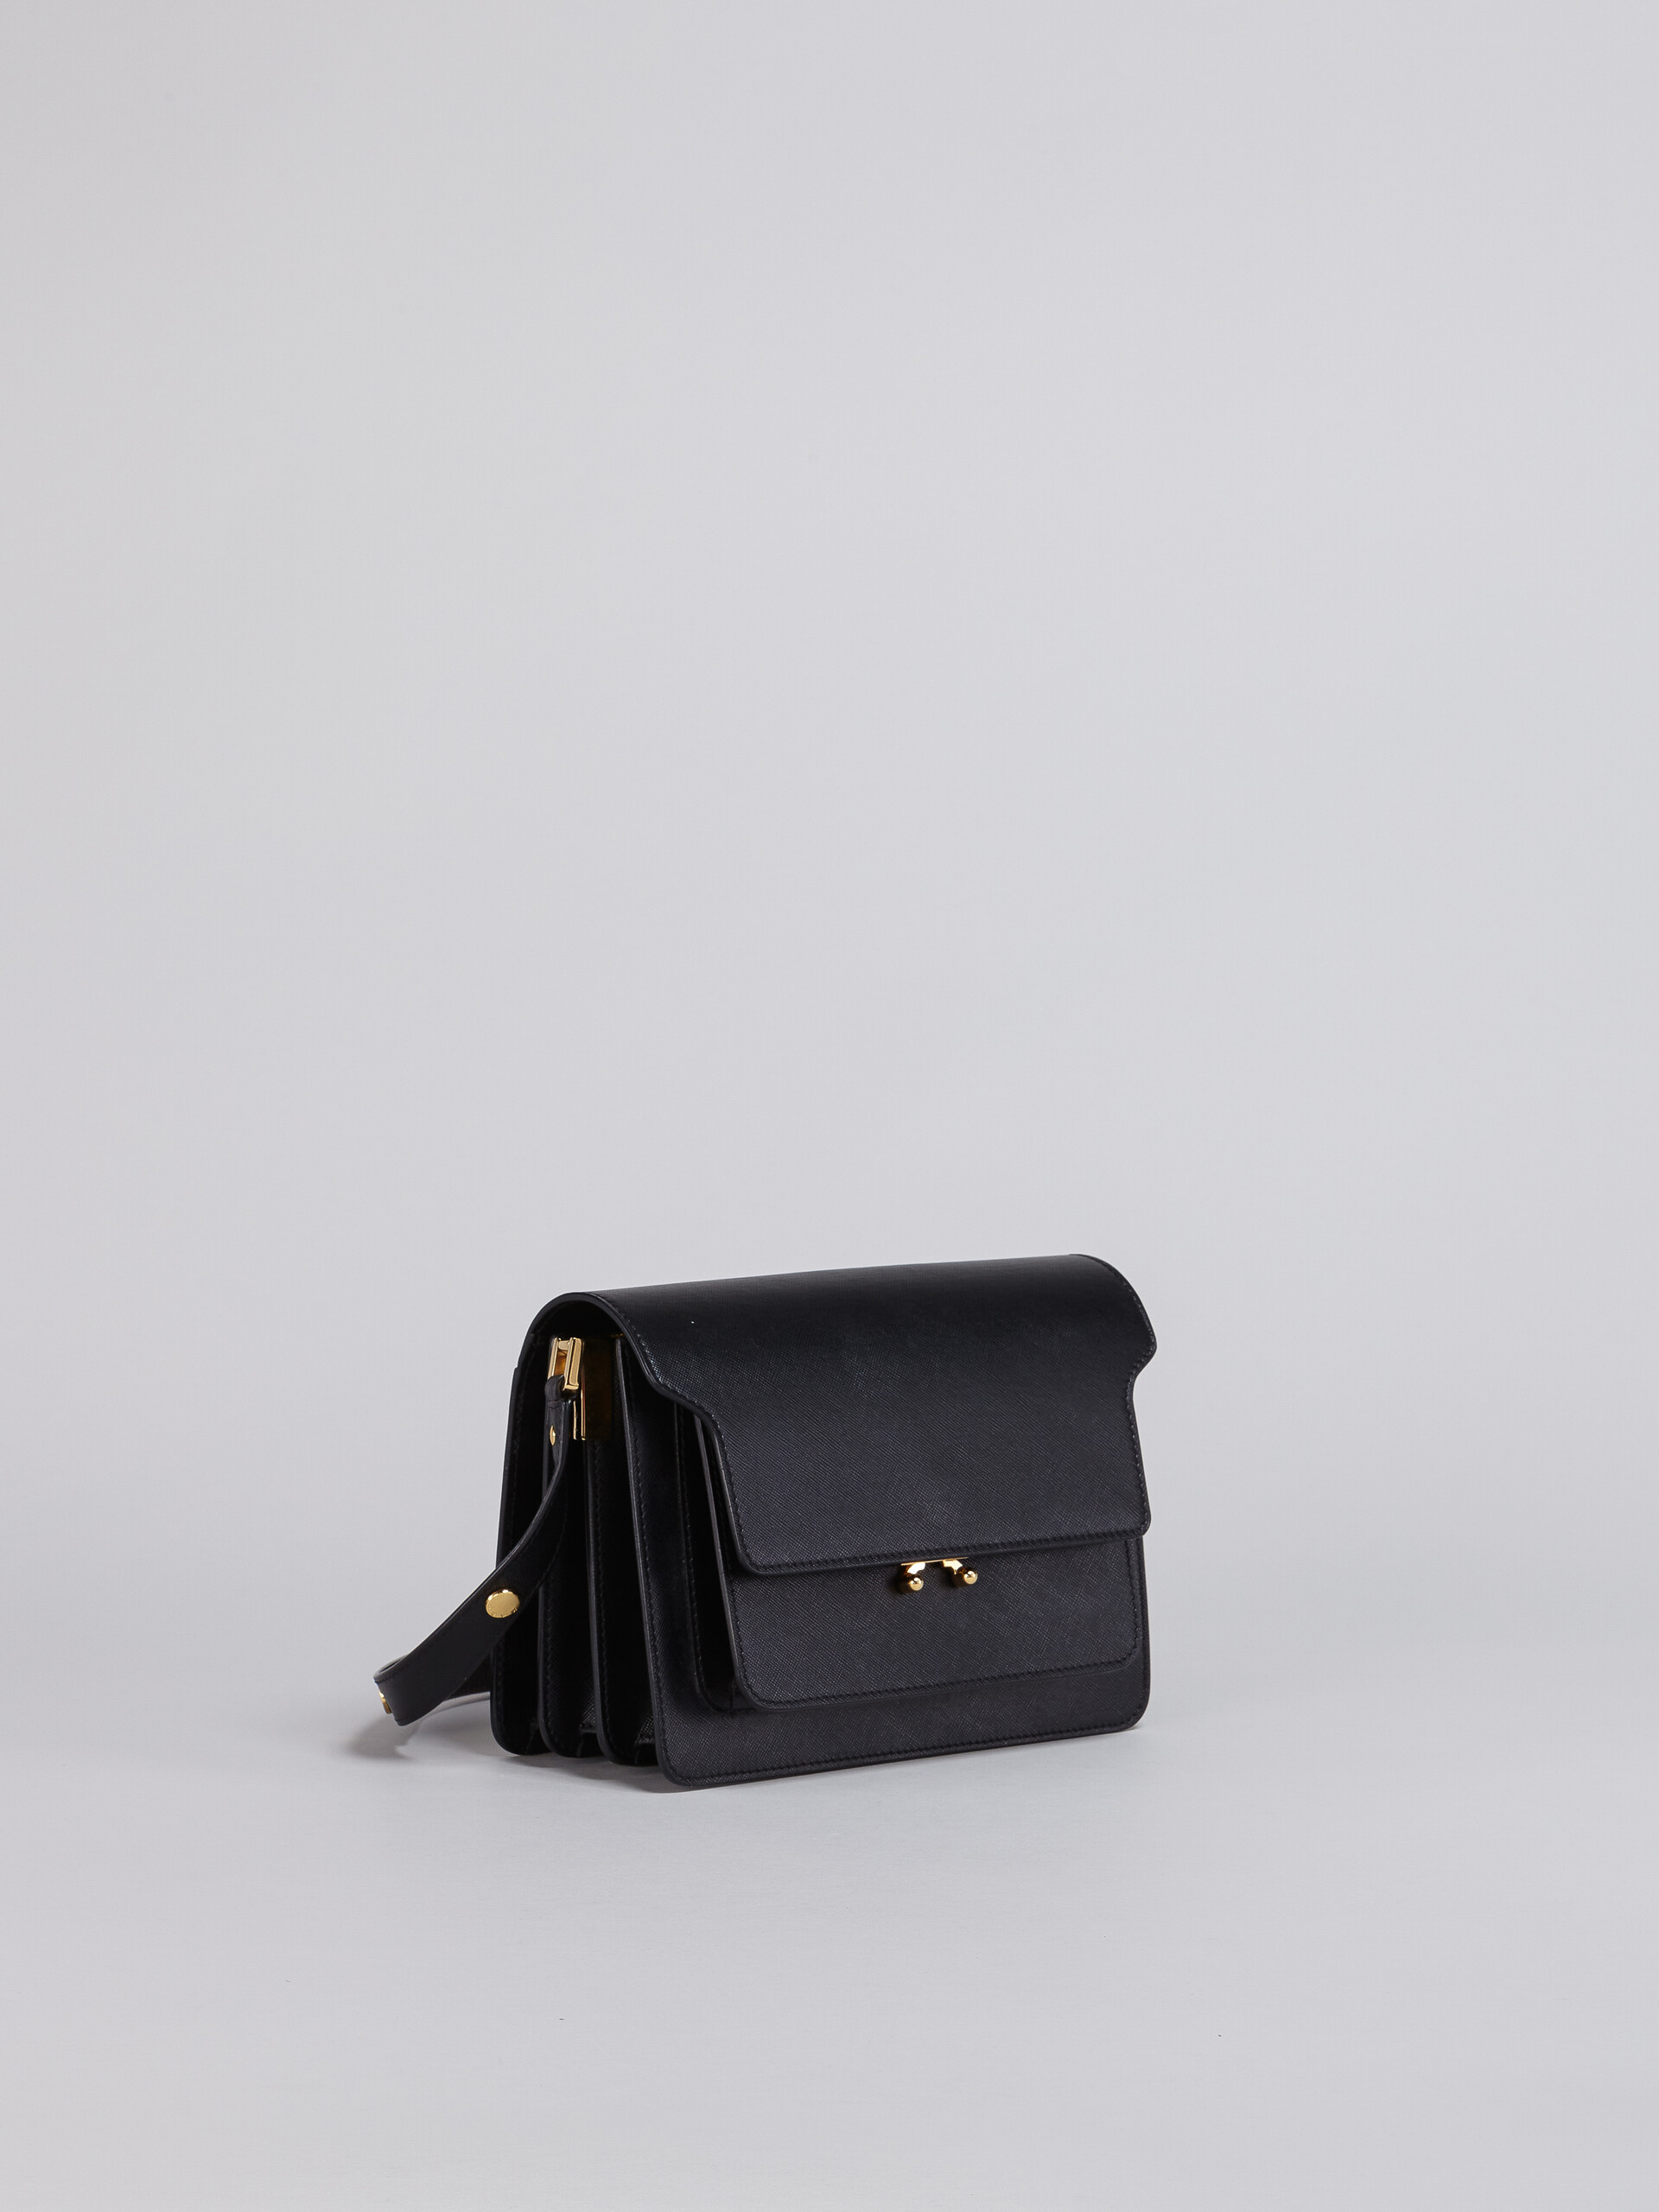 TRUNK bag in Saffiano leather - Shoulder Bags - Image 5